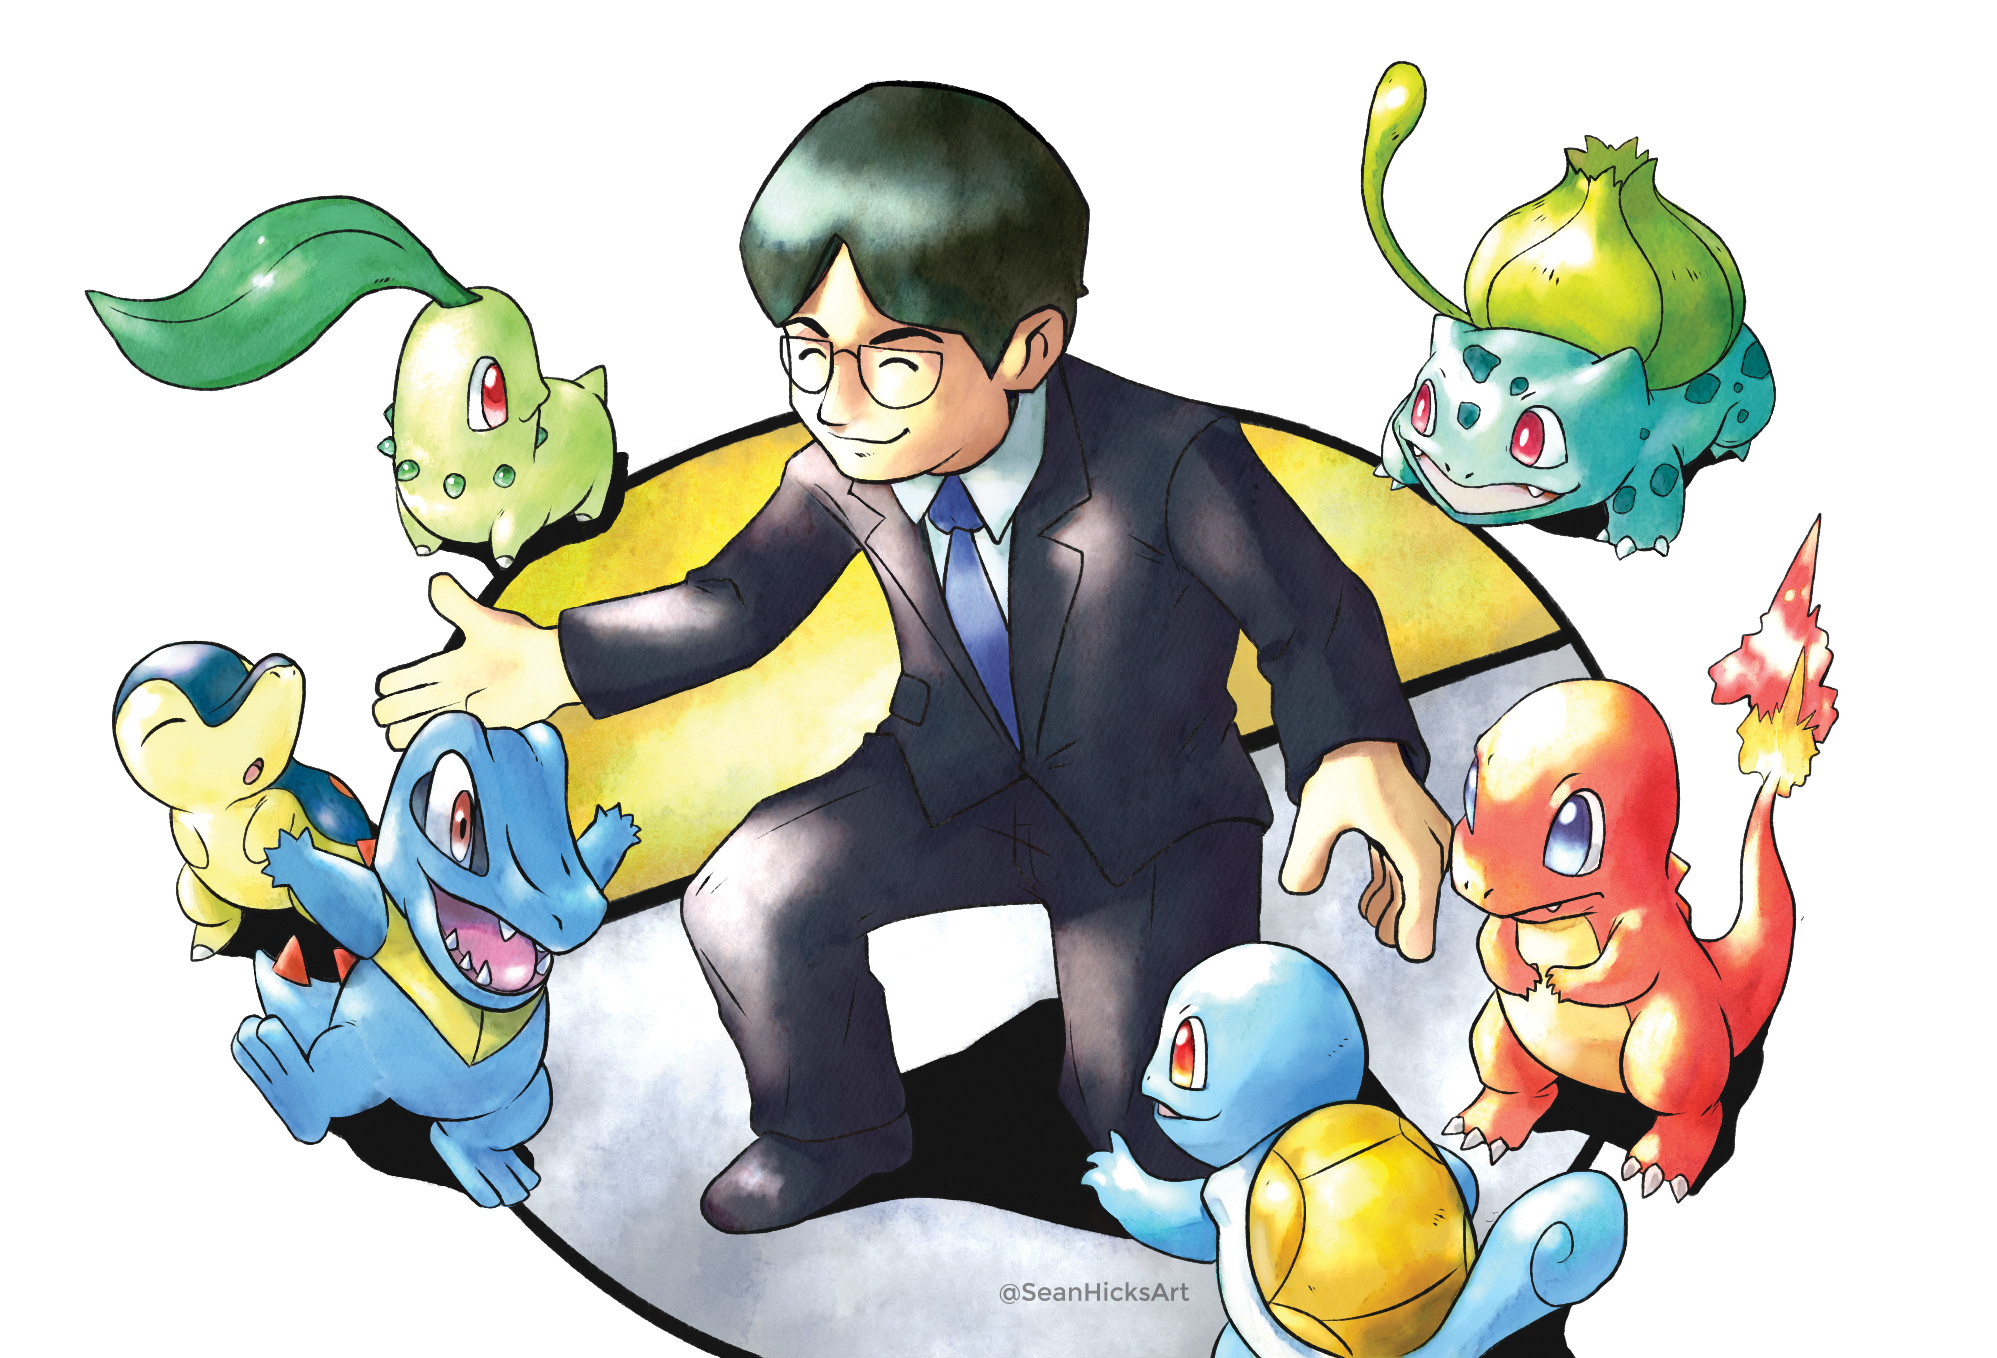 Iwata played a big role for Pokemon Gold &amp; Silver by merging the regions from the past games into the new ones. I illustrated this task by having Iwata introduce the starter pokemon from the different regions to one another. 